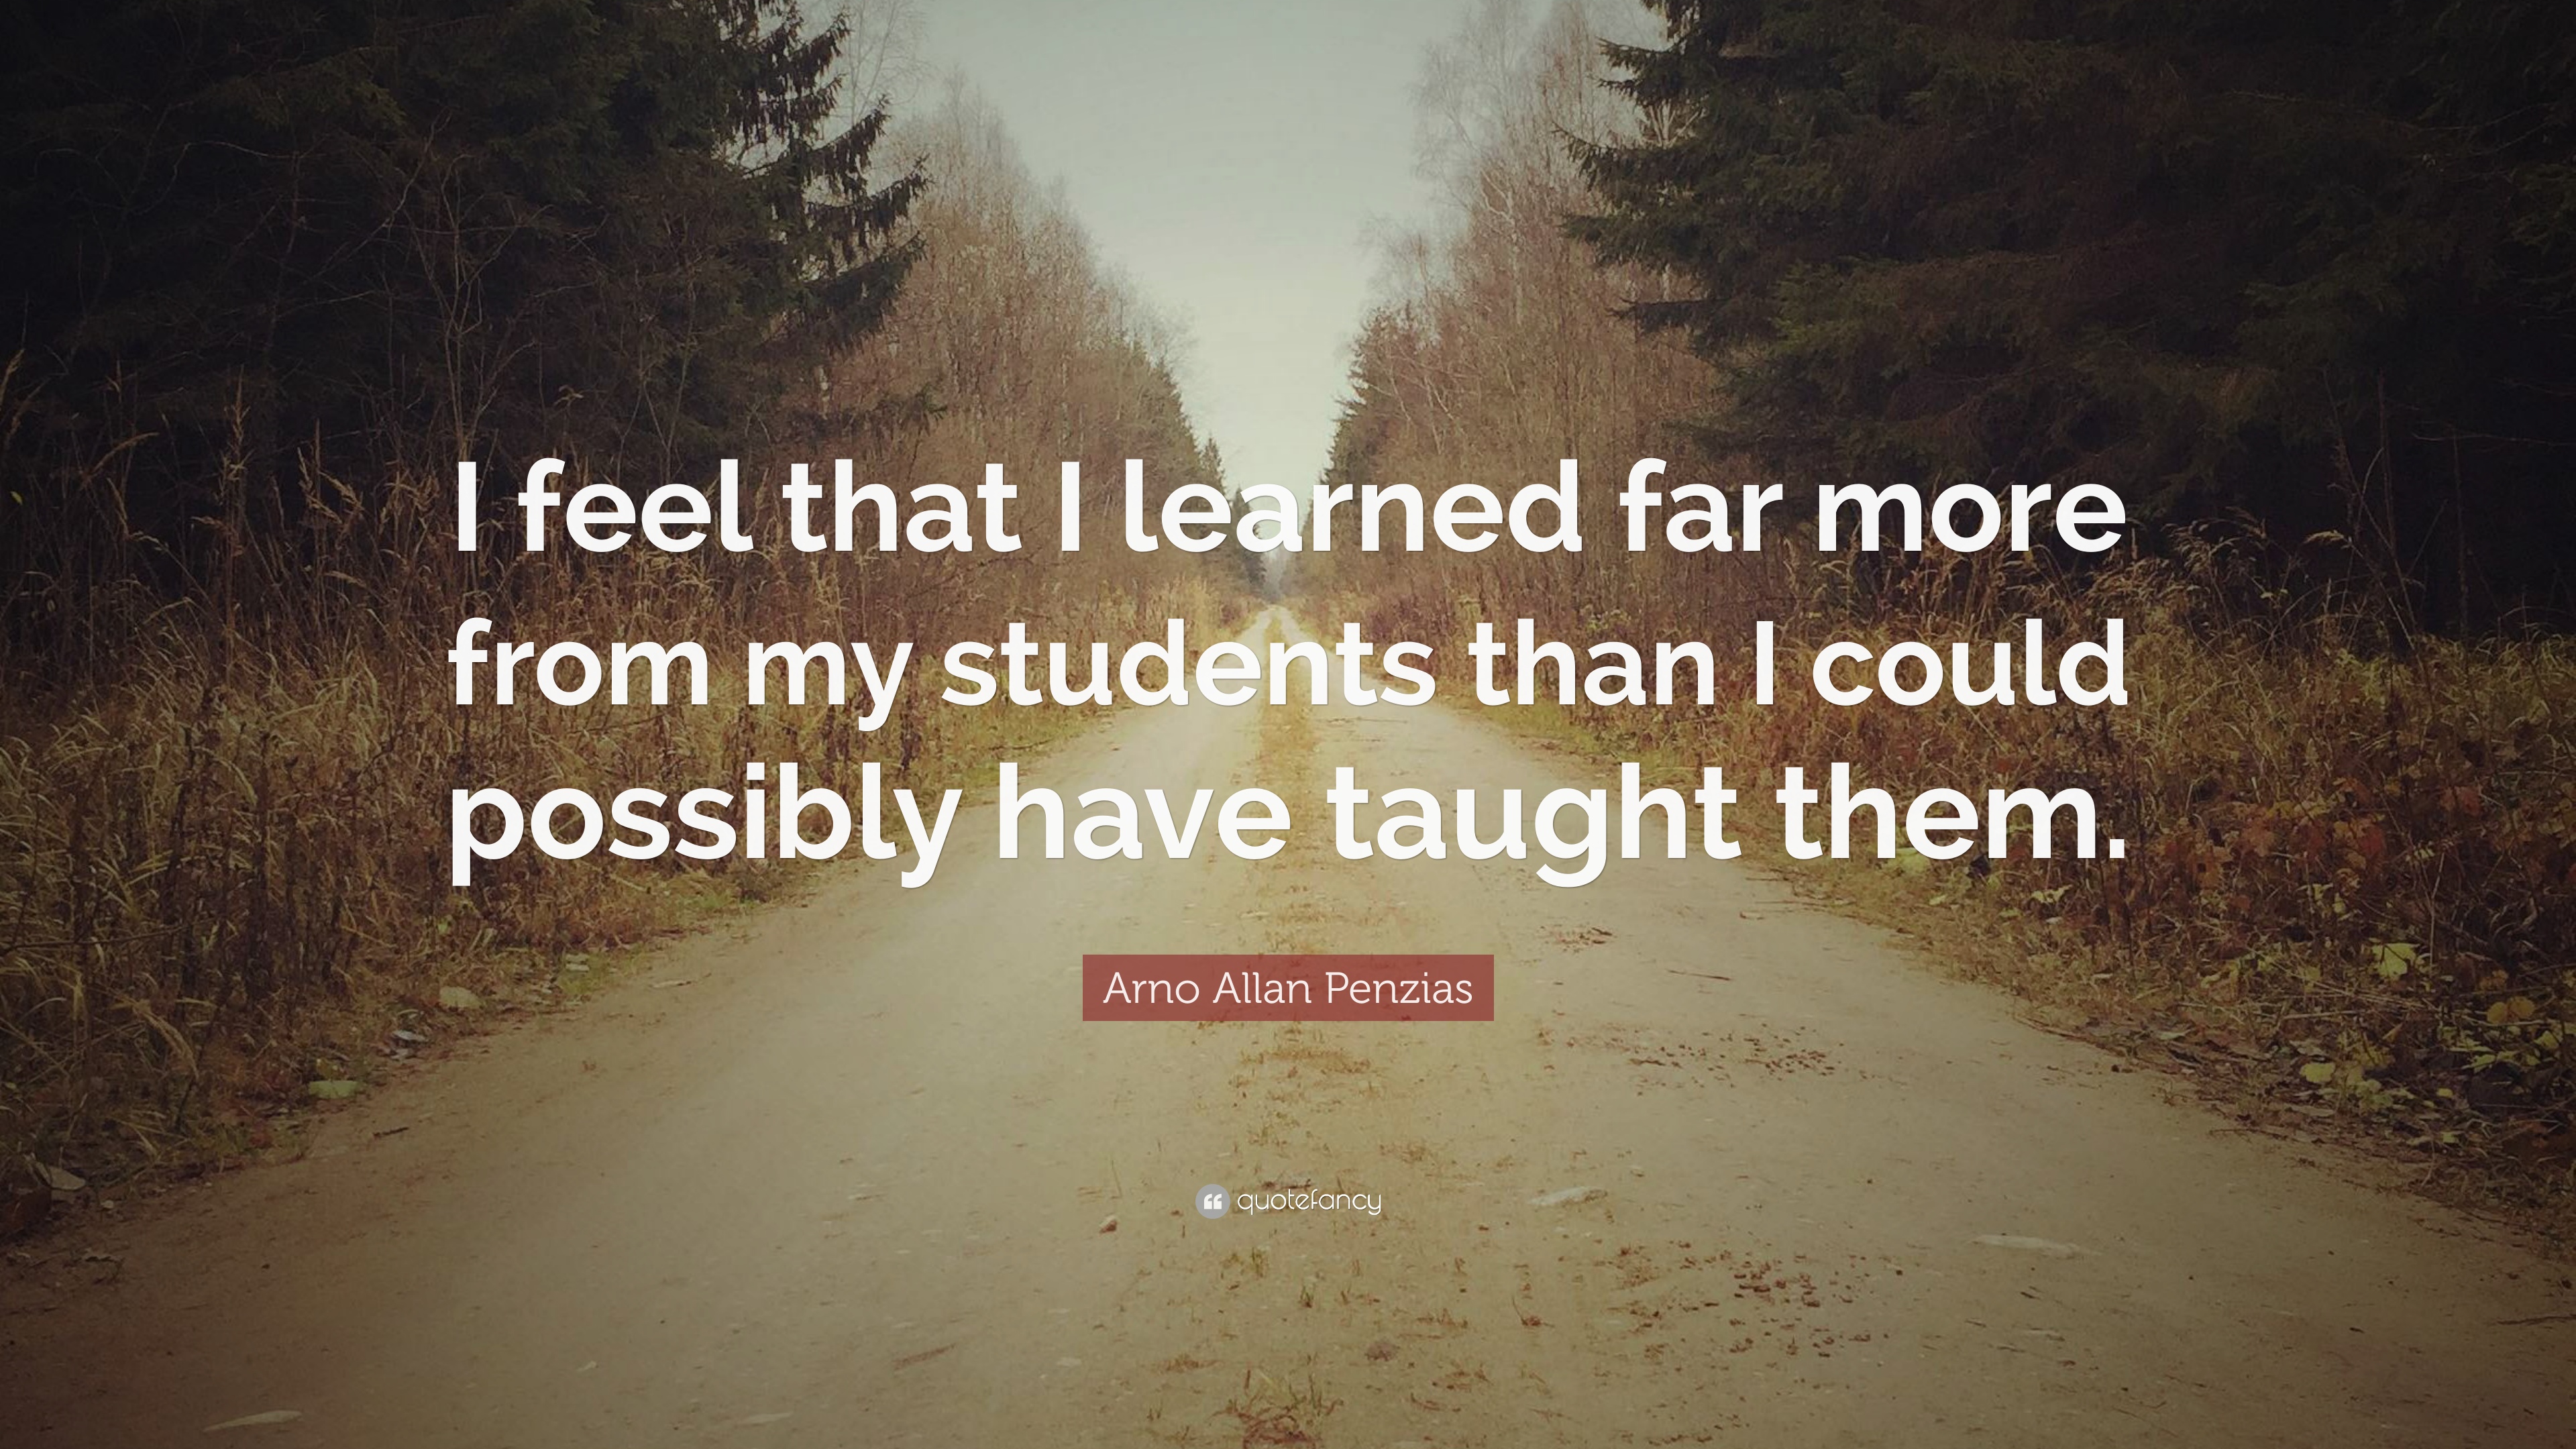 Arno allan penzias quote âi feel that i learned far more from my students than i